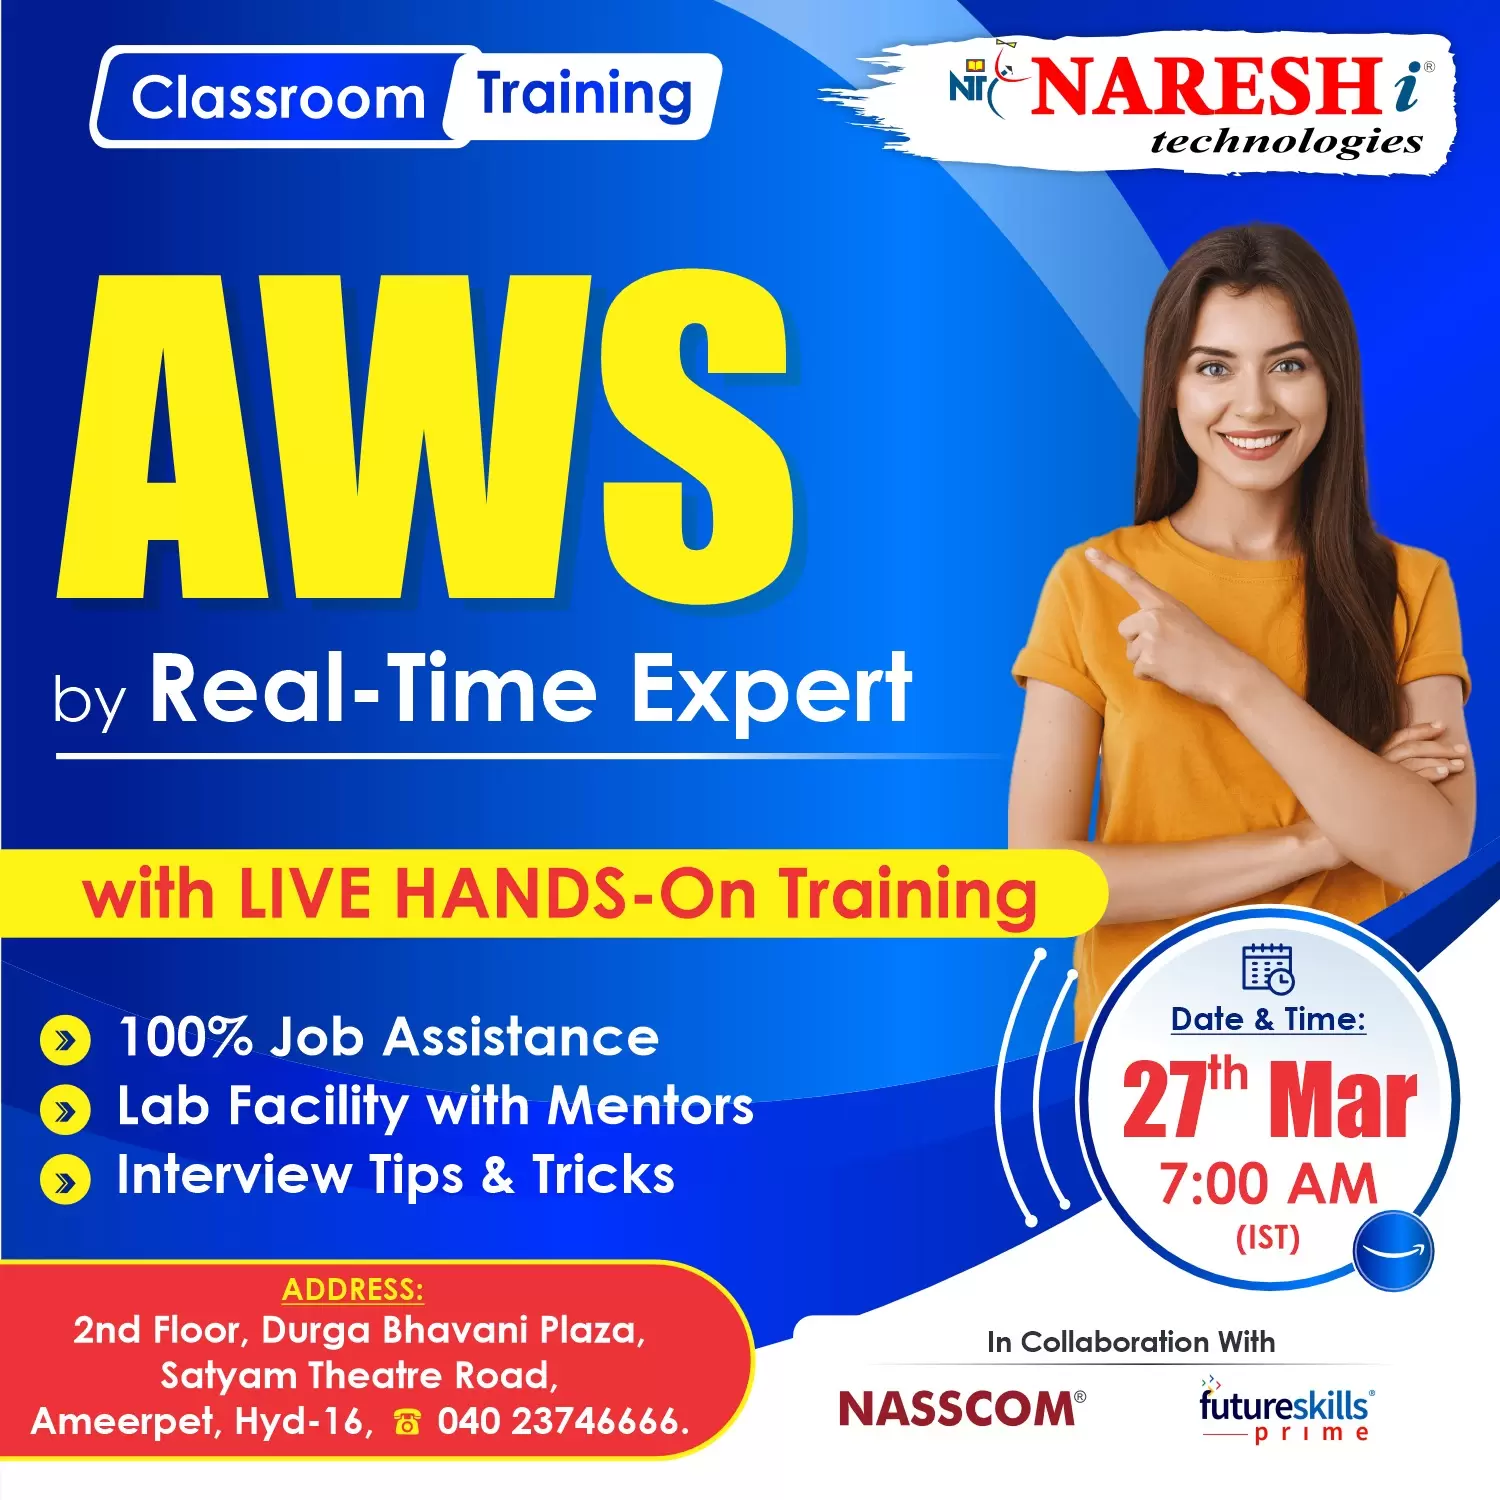 Free Offline  Demo On AWS by Real-time Expert - NareshIT